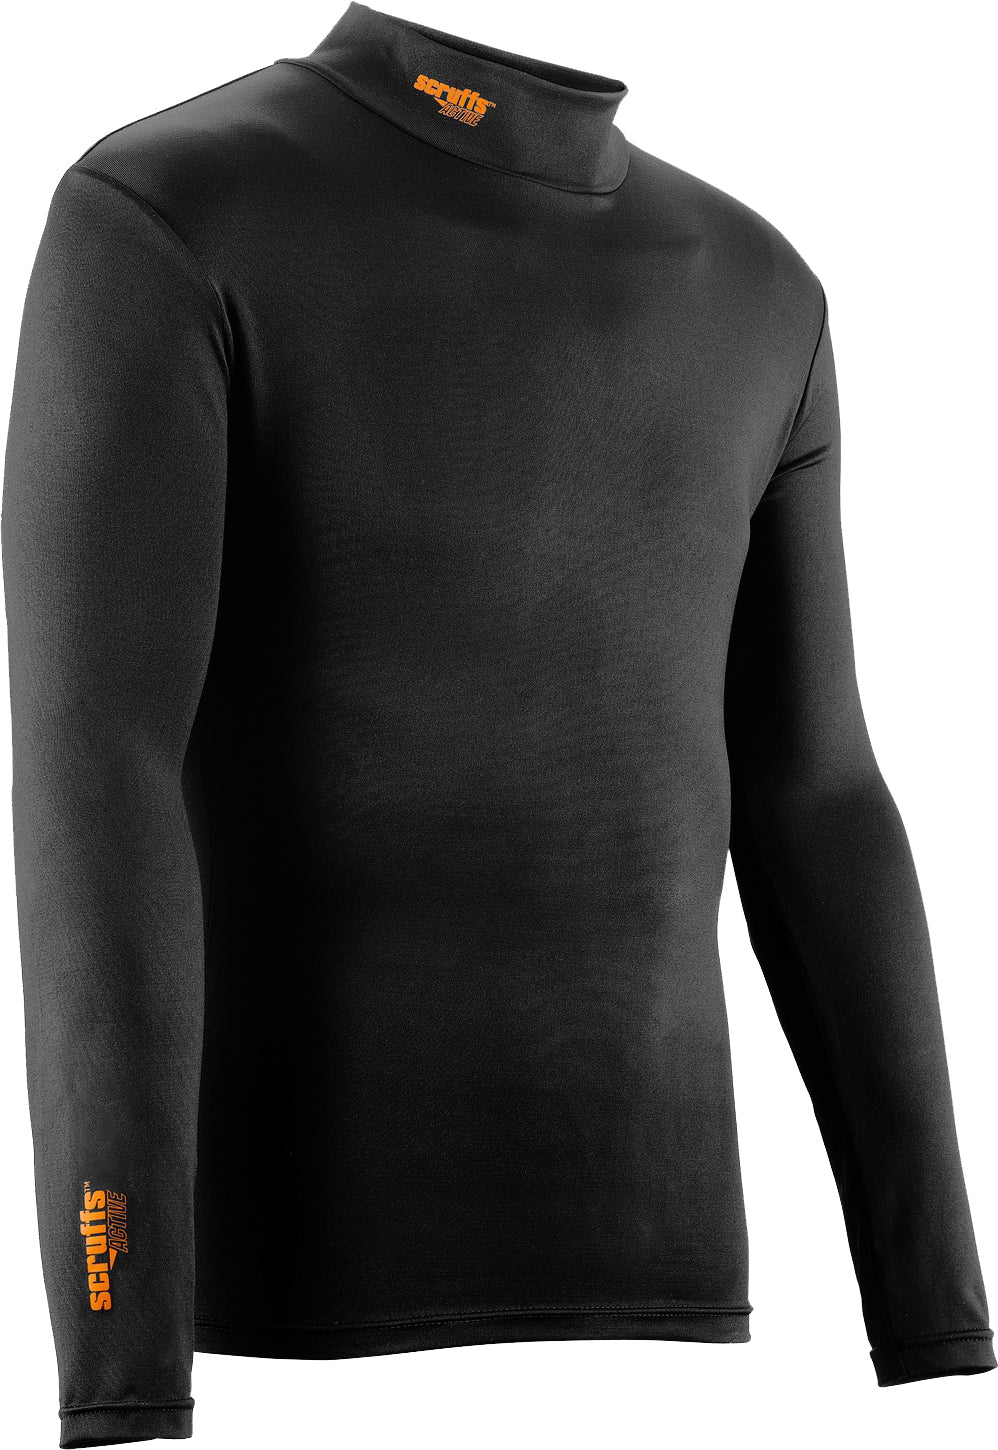 SCRUFFS Pro Base Layer Top - Various Sizes Available